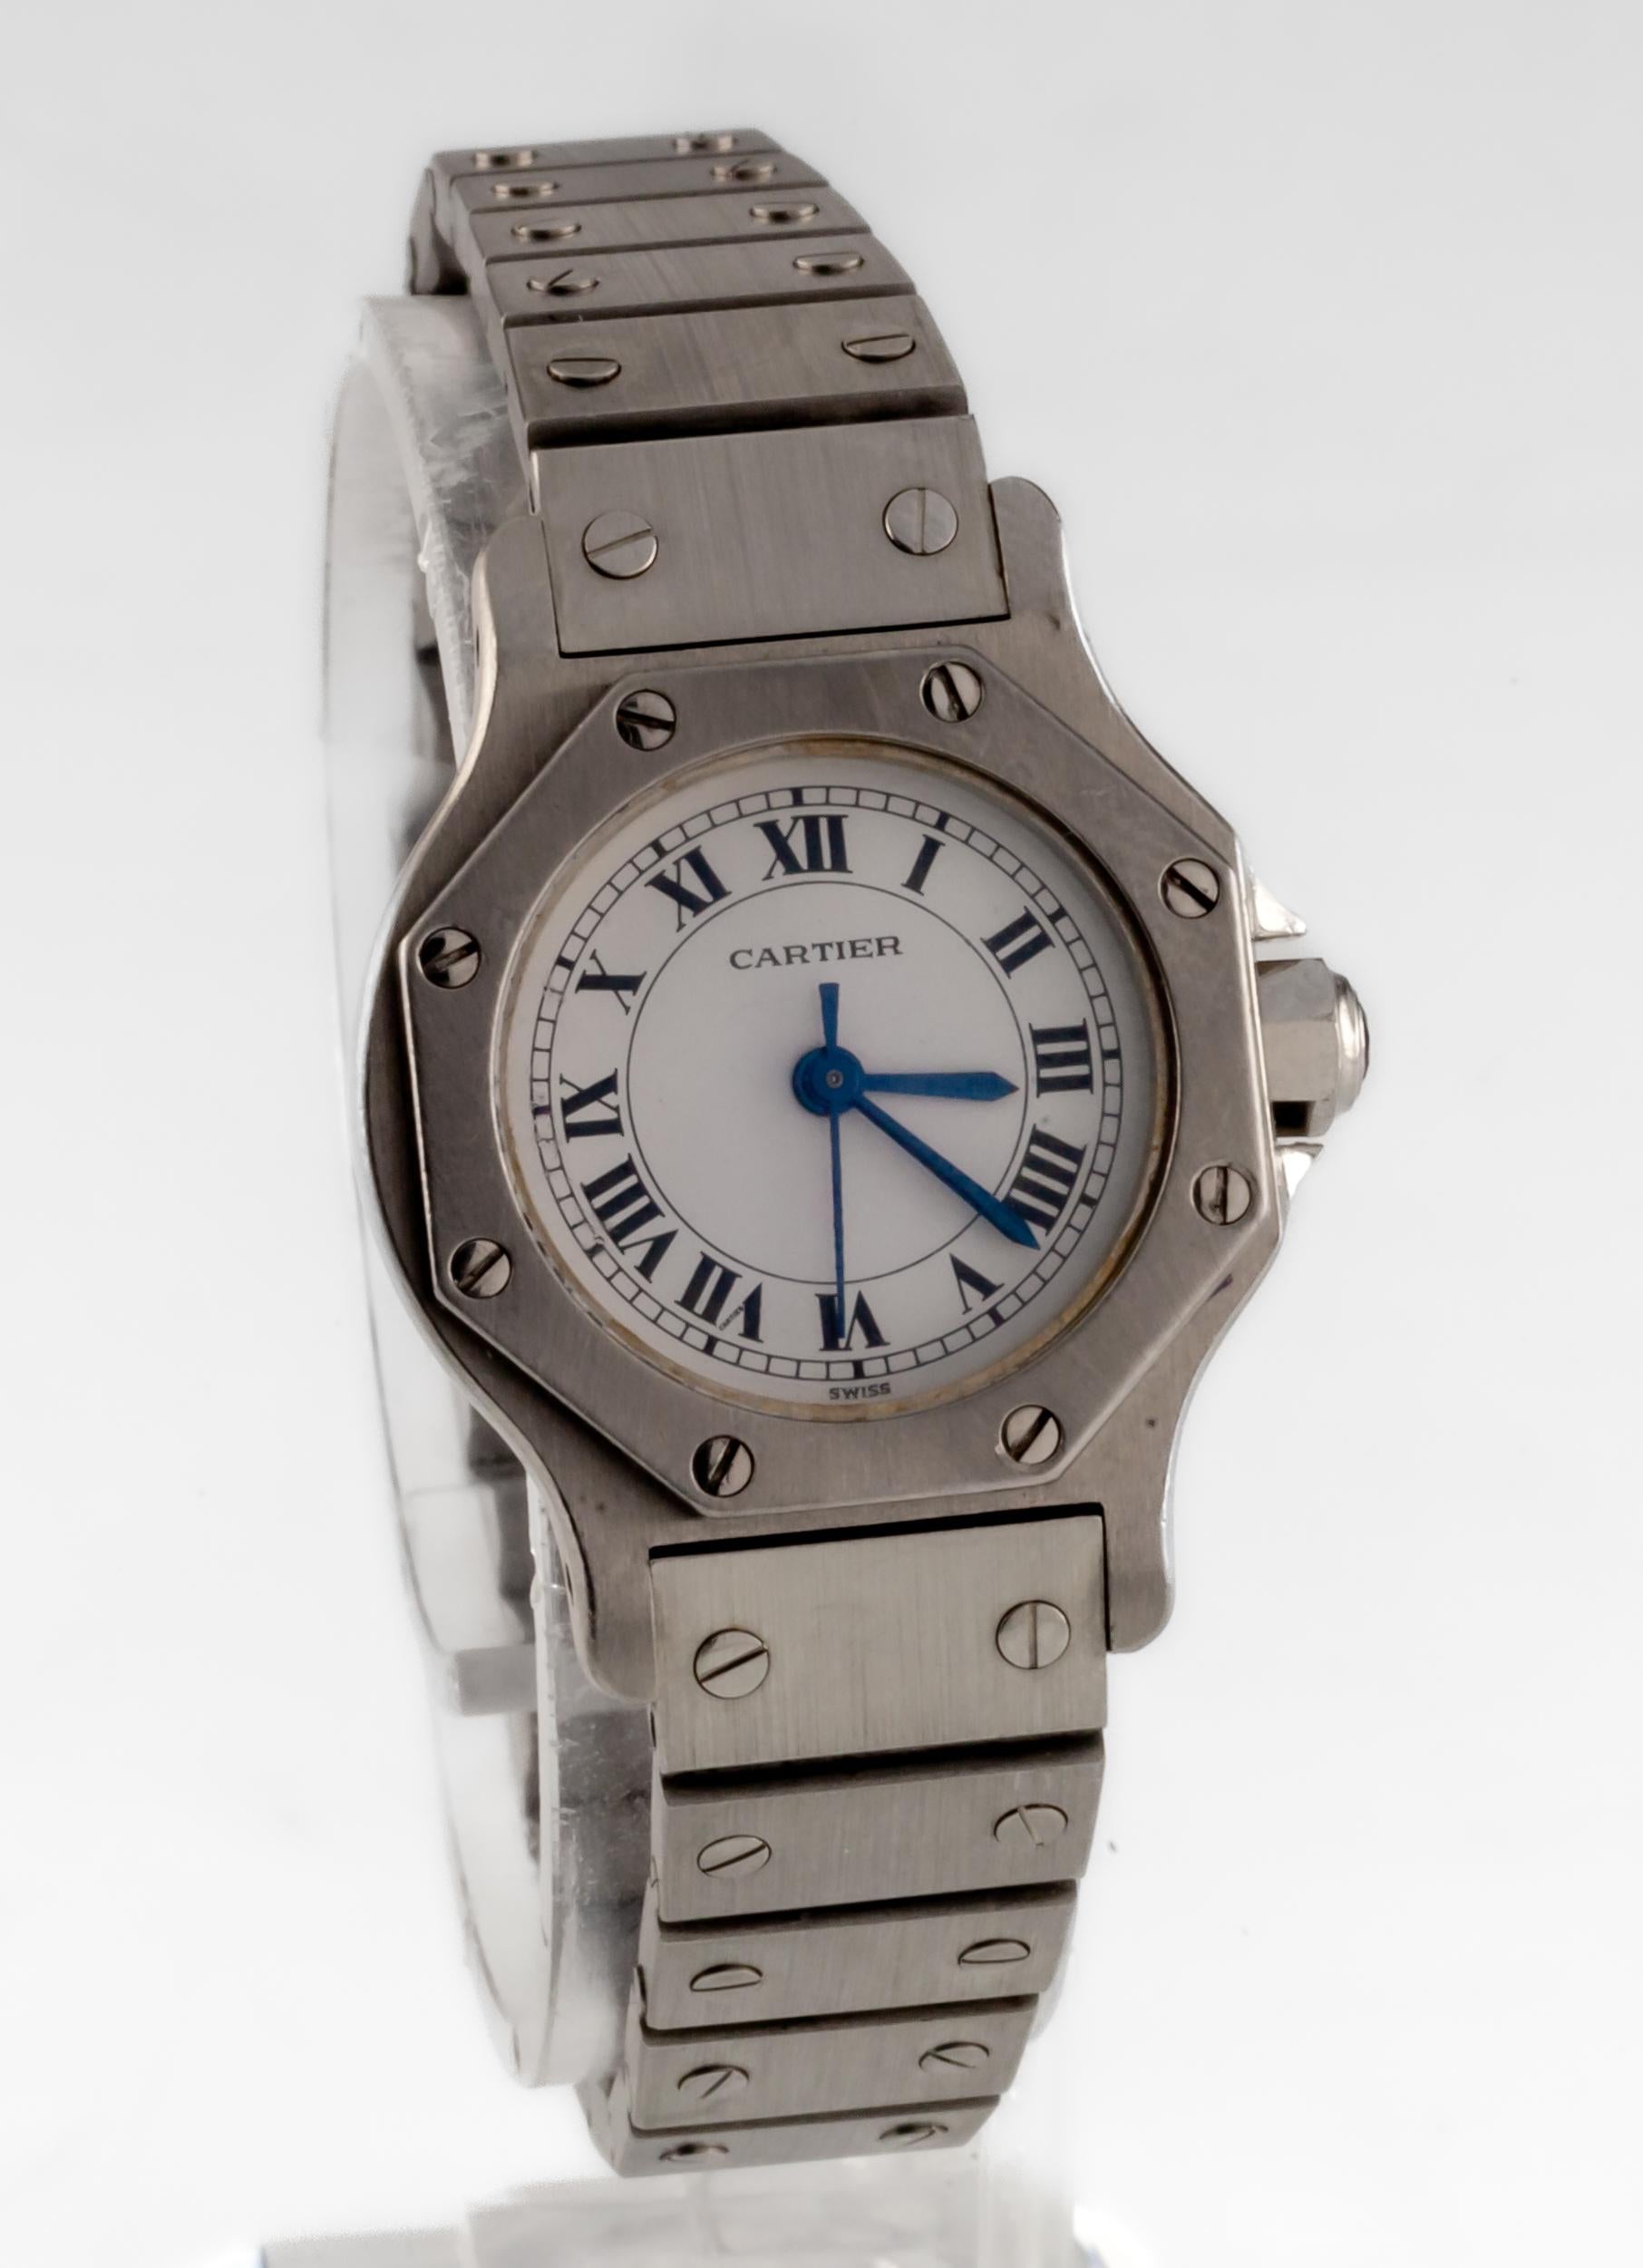 Cartier Women's Stainless Steel Round Santos Automatic Watch w/ Box and Papers
Movement #2670-ETA
Case #090605956 SS
Stainless Steel Round Case
25 mm in Diameter (27 mm w/ Spinel Crown)
Lug-to-Lug Distance = 31 mm
Lug-to-Lug Width = 12 mm
Thickness